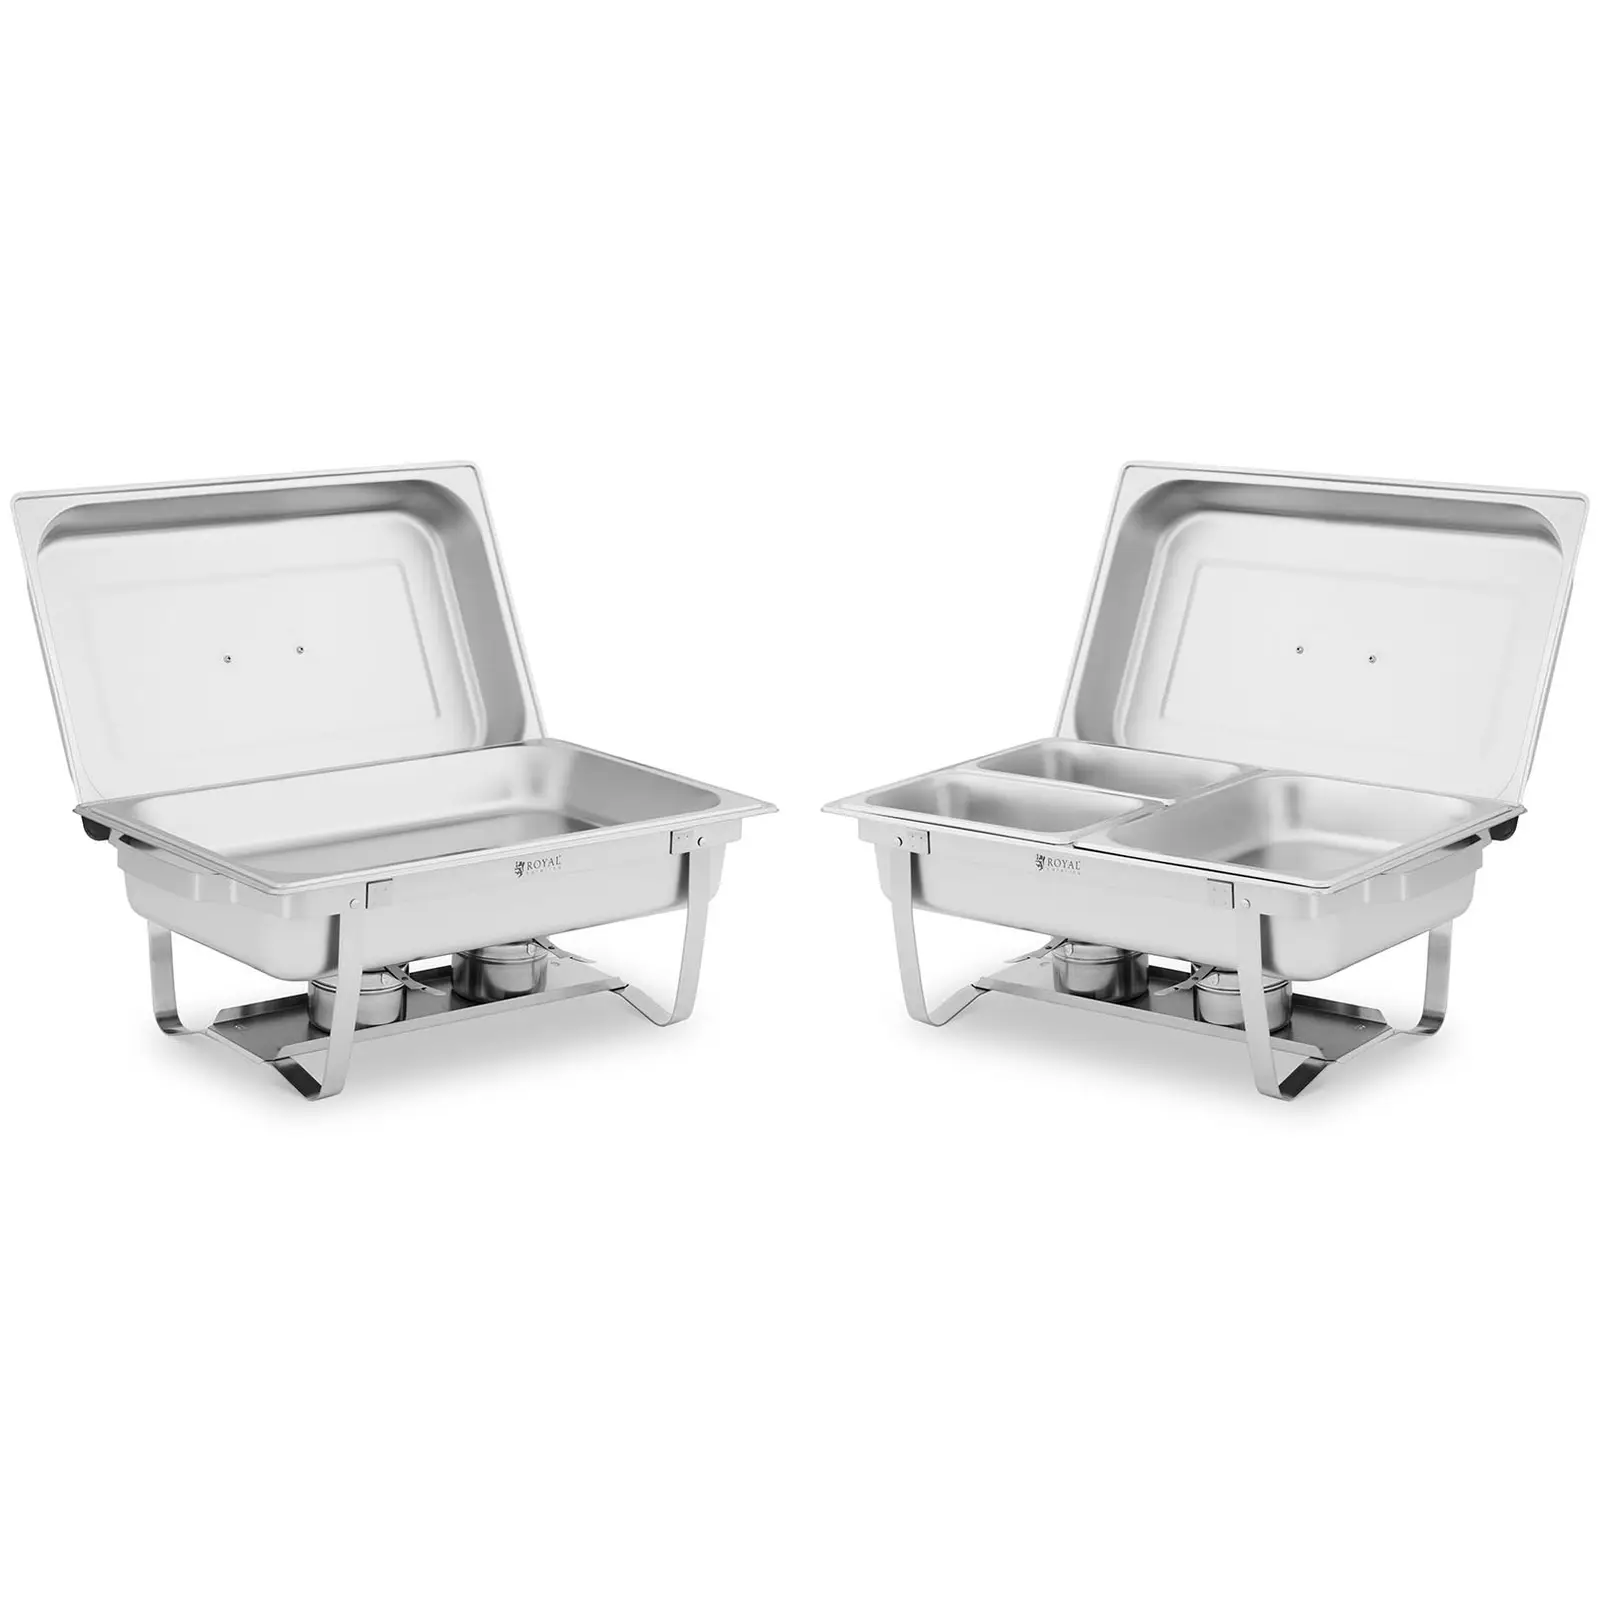 Chafing Dish Set 2-teilig - 2 x 8 L - inkl. GN Behälter - Royal Catering